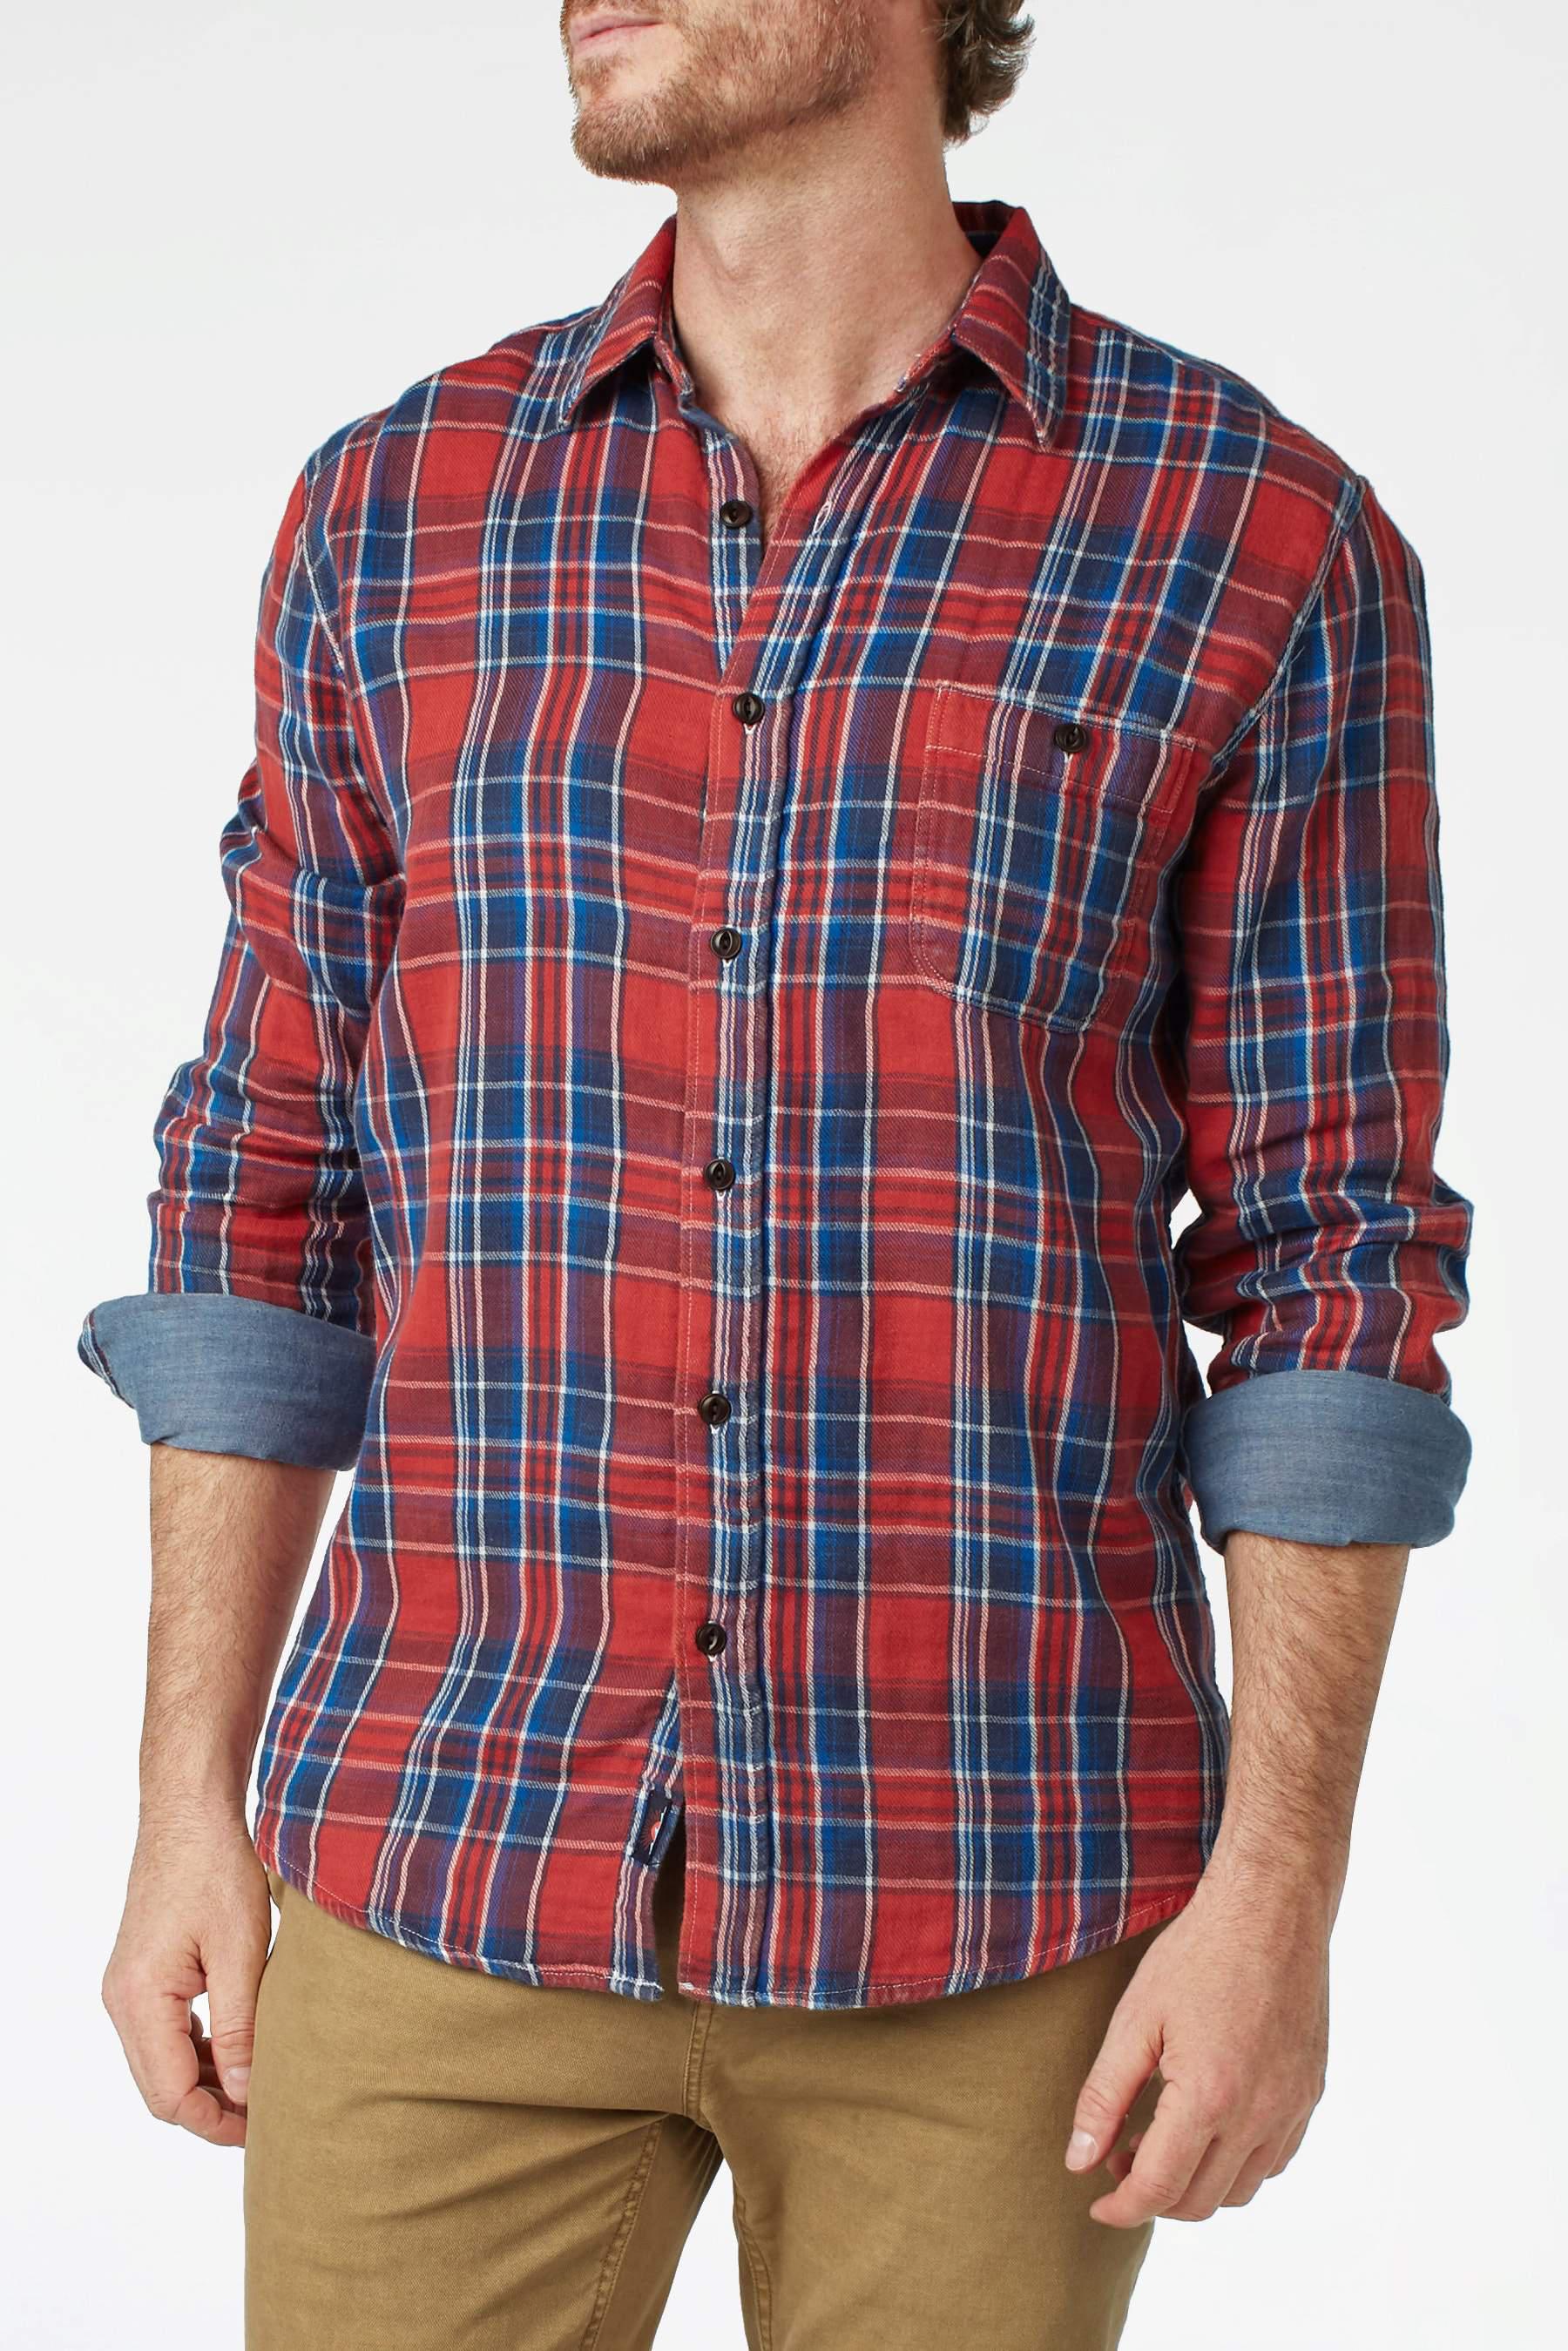 Lyst - Faherty Brand Doublecloth Shirt in Red for Men